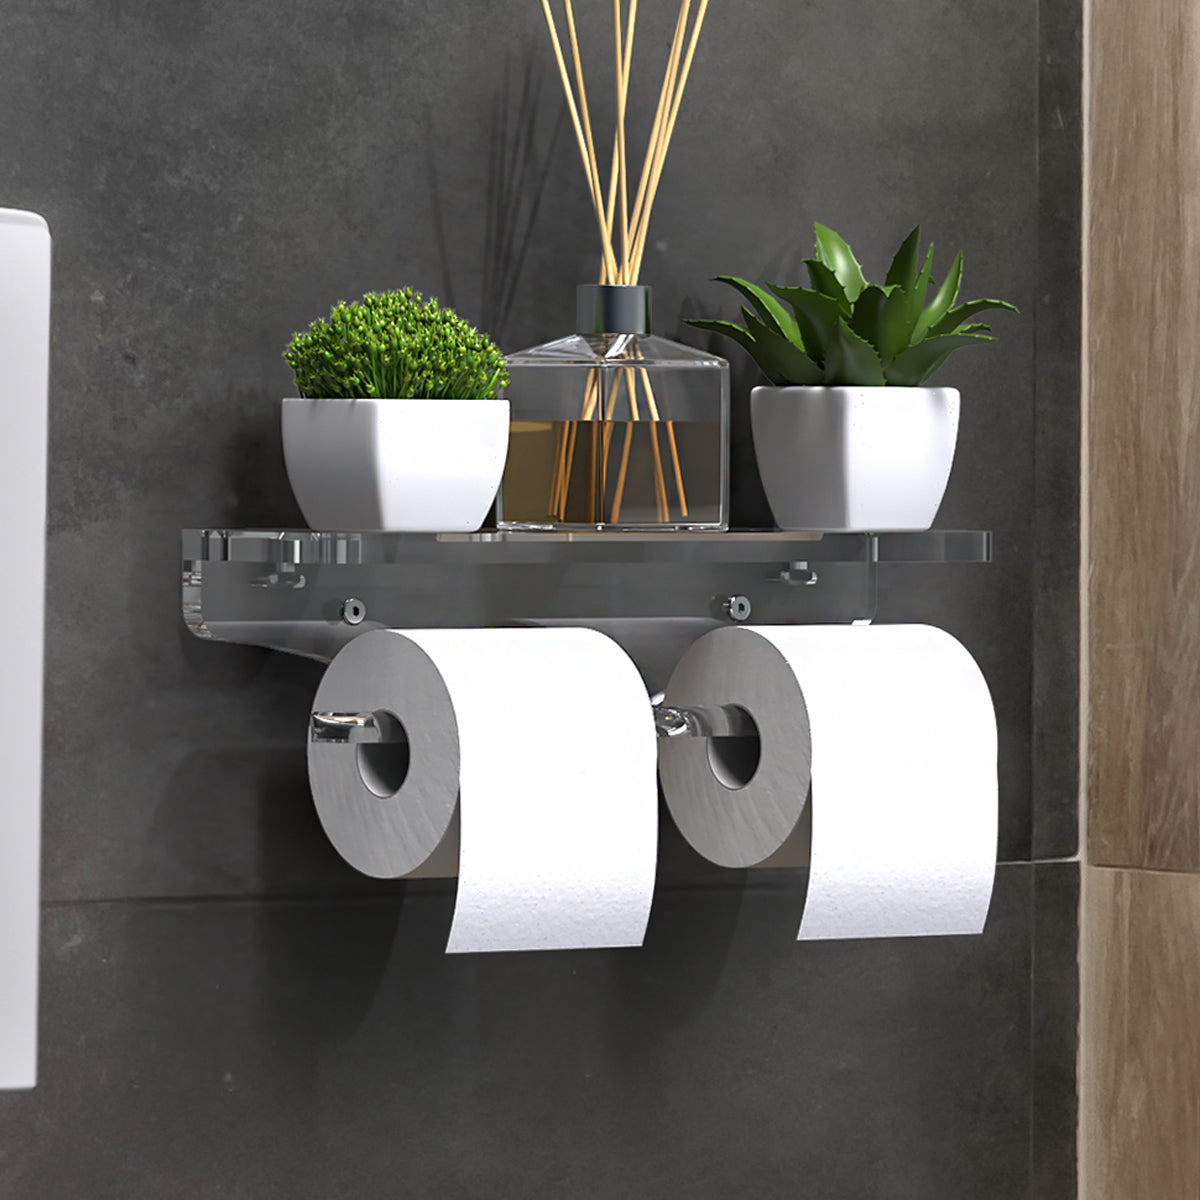 double-toilet-paper-holder-with-shelf.jpg__PID:686120fc-b593-4ddf-bddb-9a7478ace525